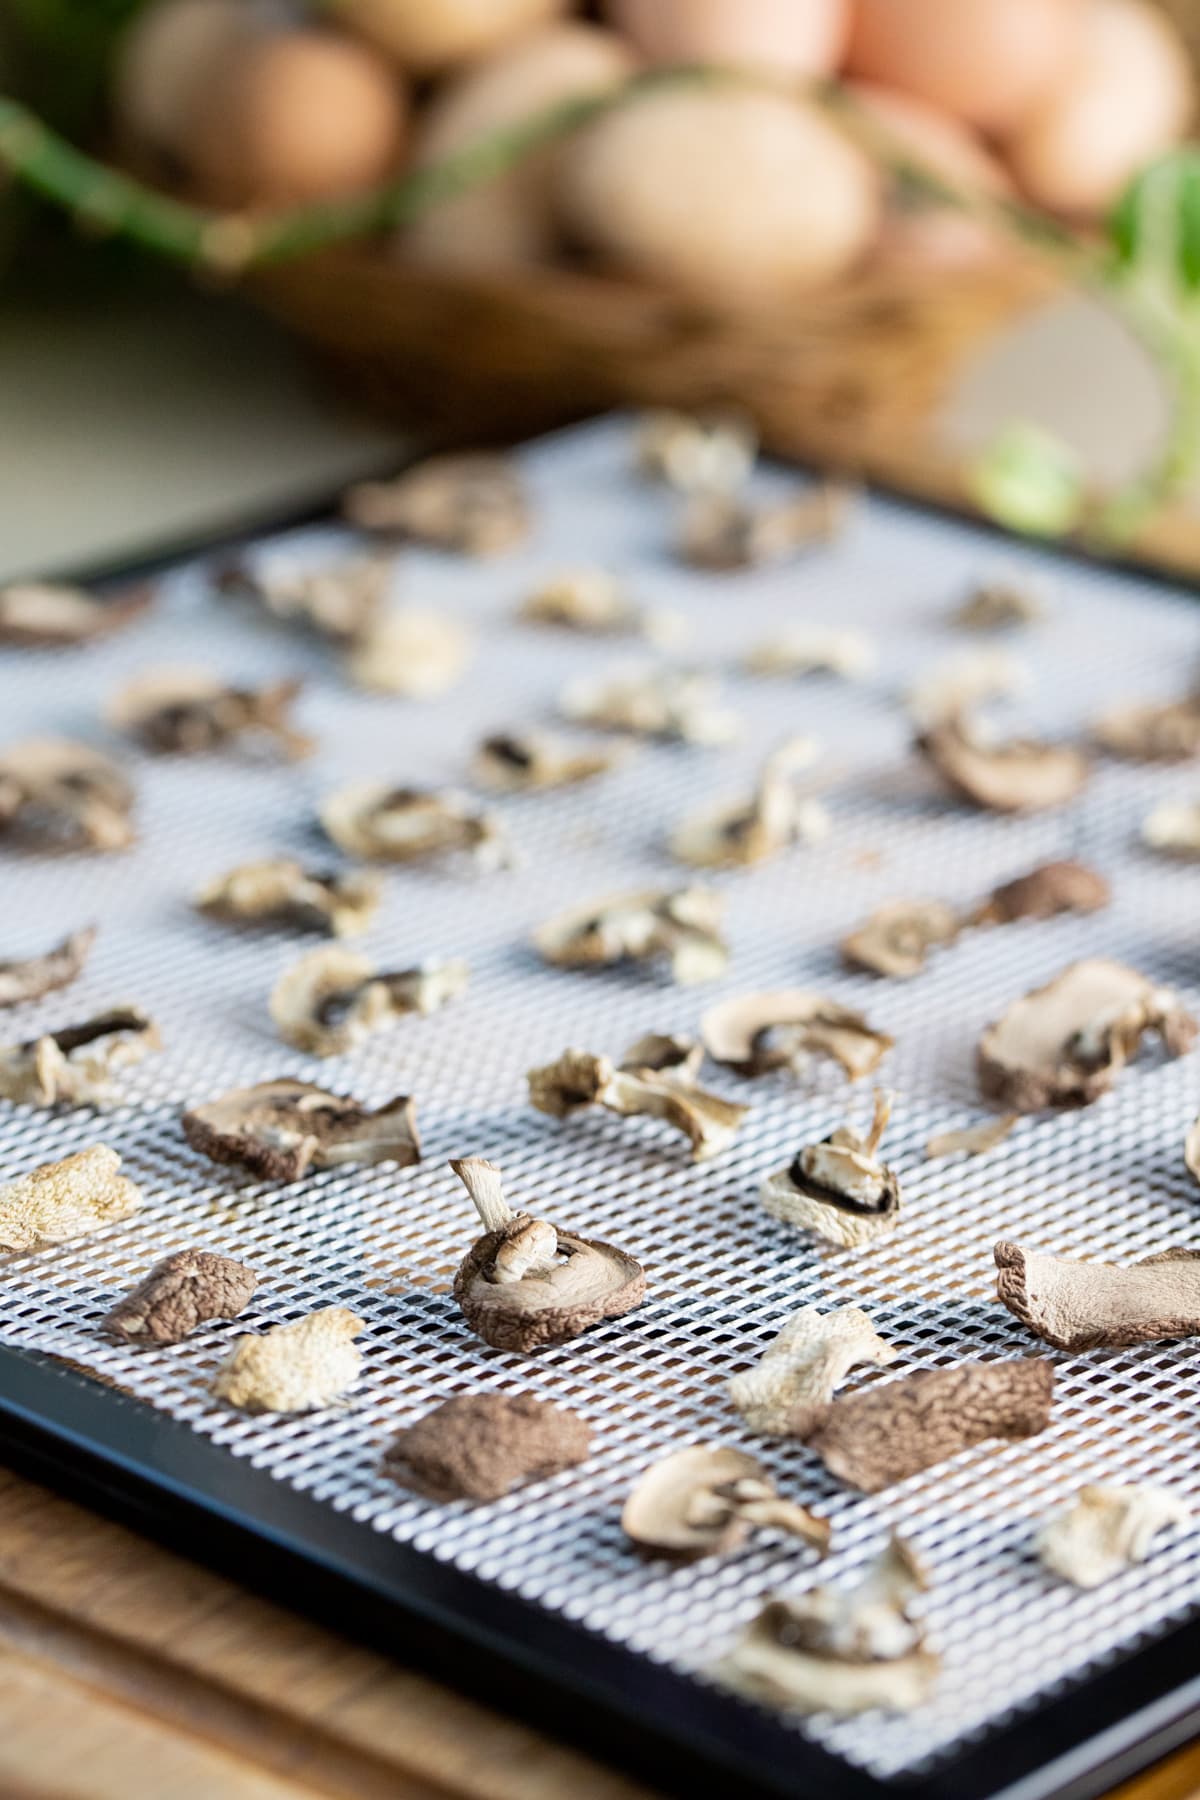 dehydrated mushrooms on the tray of the dehydrator